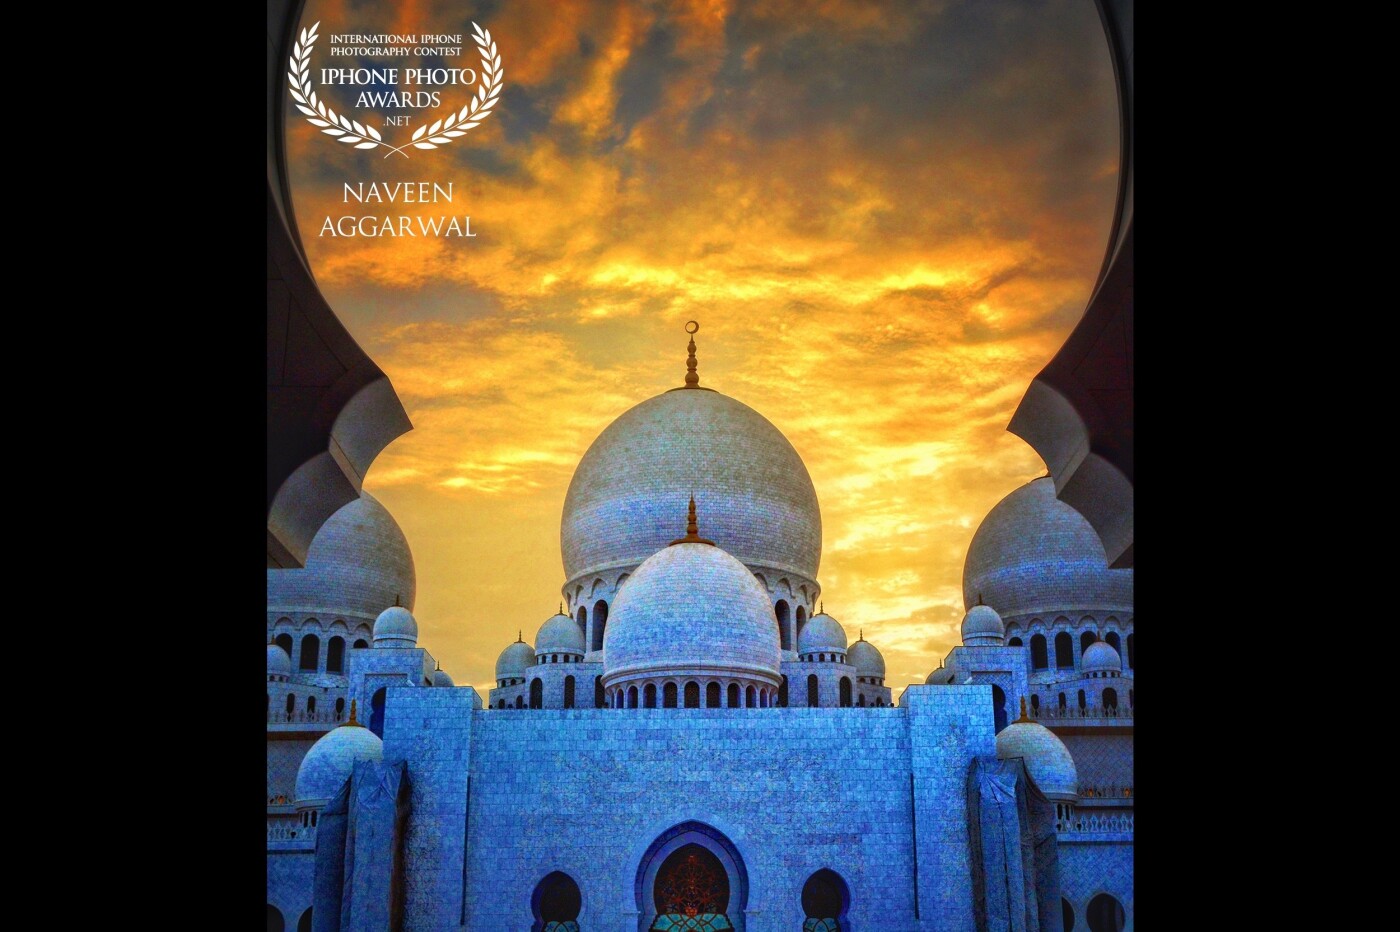 World’s biggest mosque - sheikh Zayed mosque in Abudhabi. Amazing architecture and at the same time, divine feelings after entering the mosque. Just look at this and you will be departed off to your negativity.